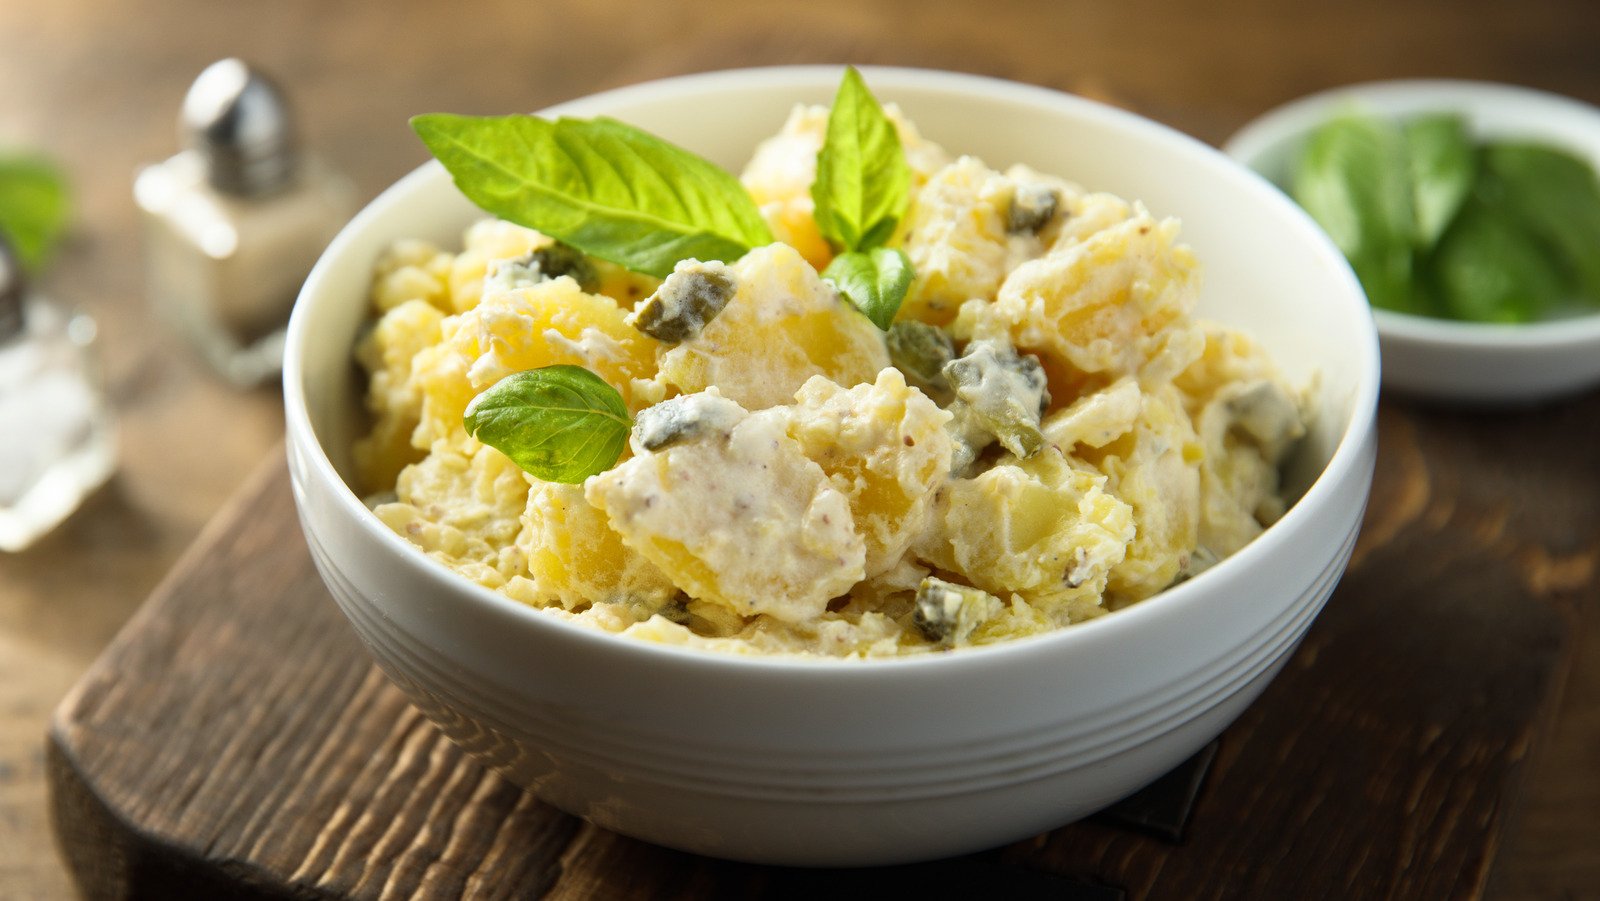 12 Tips You Need To Make The Absolute Best Potato Salad